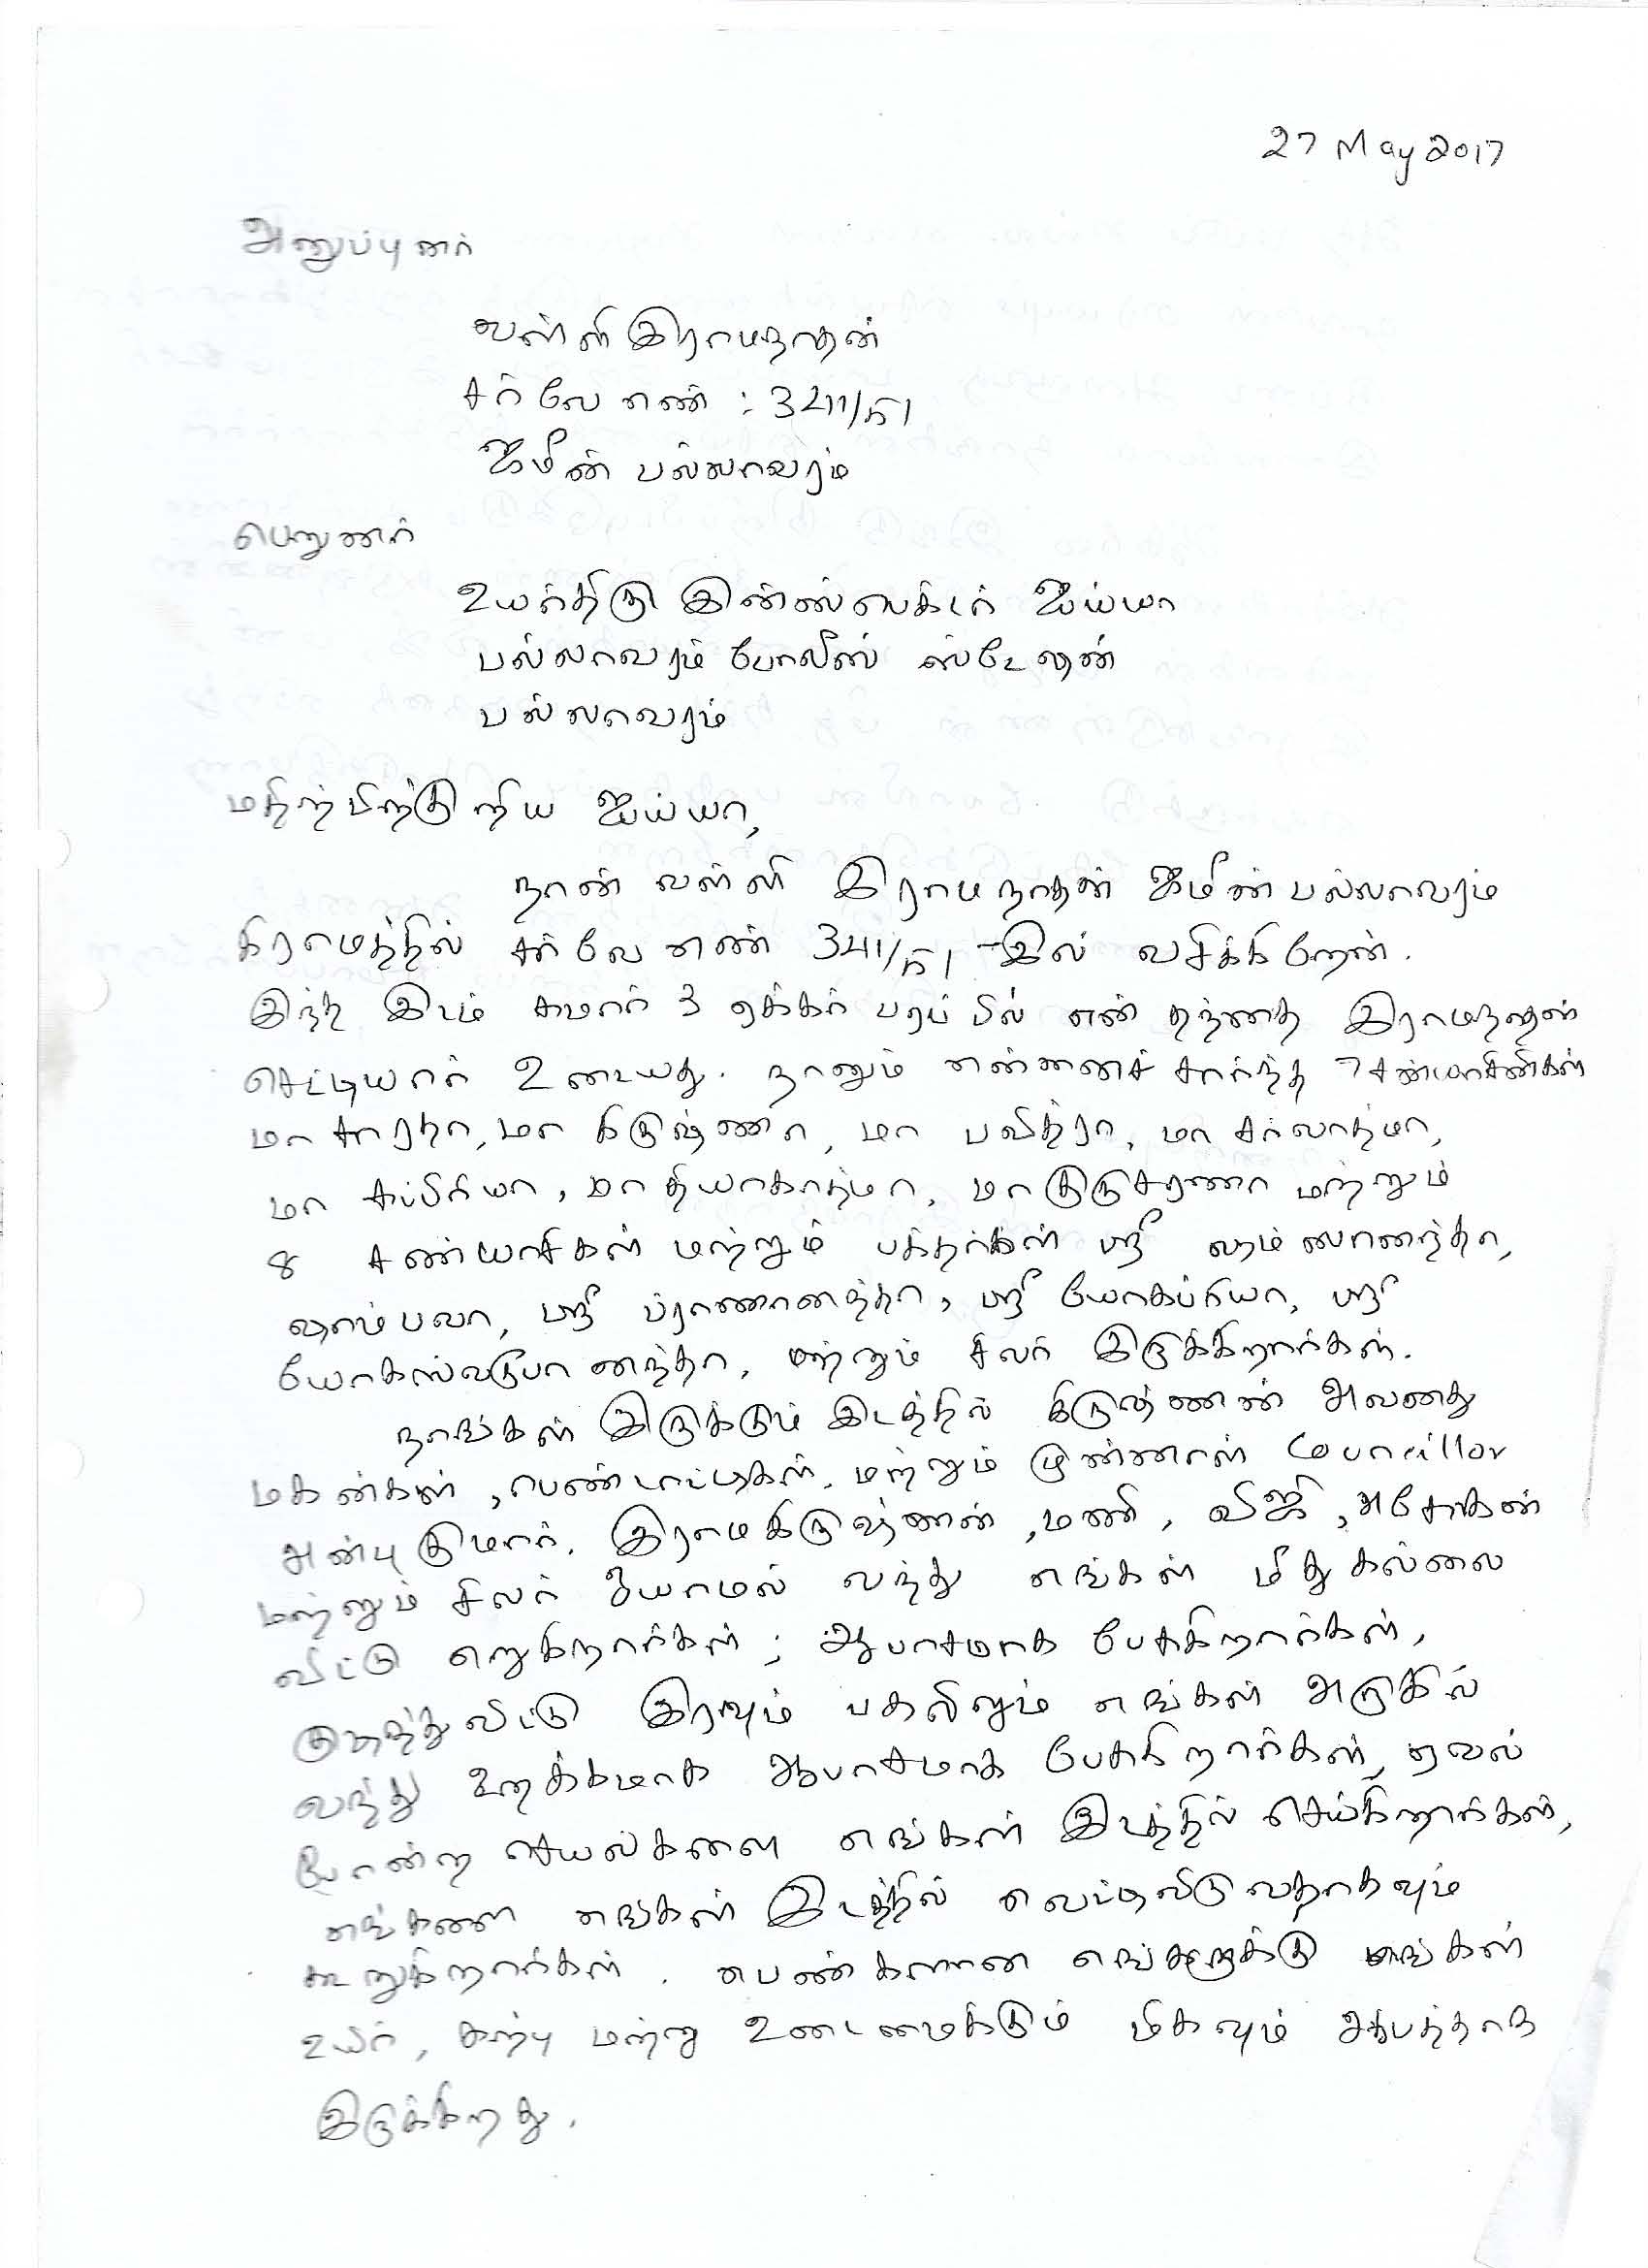 Bakthika Swami Complaint 27 May 2017_Page_1